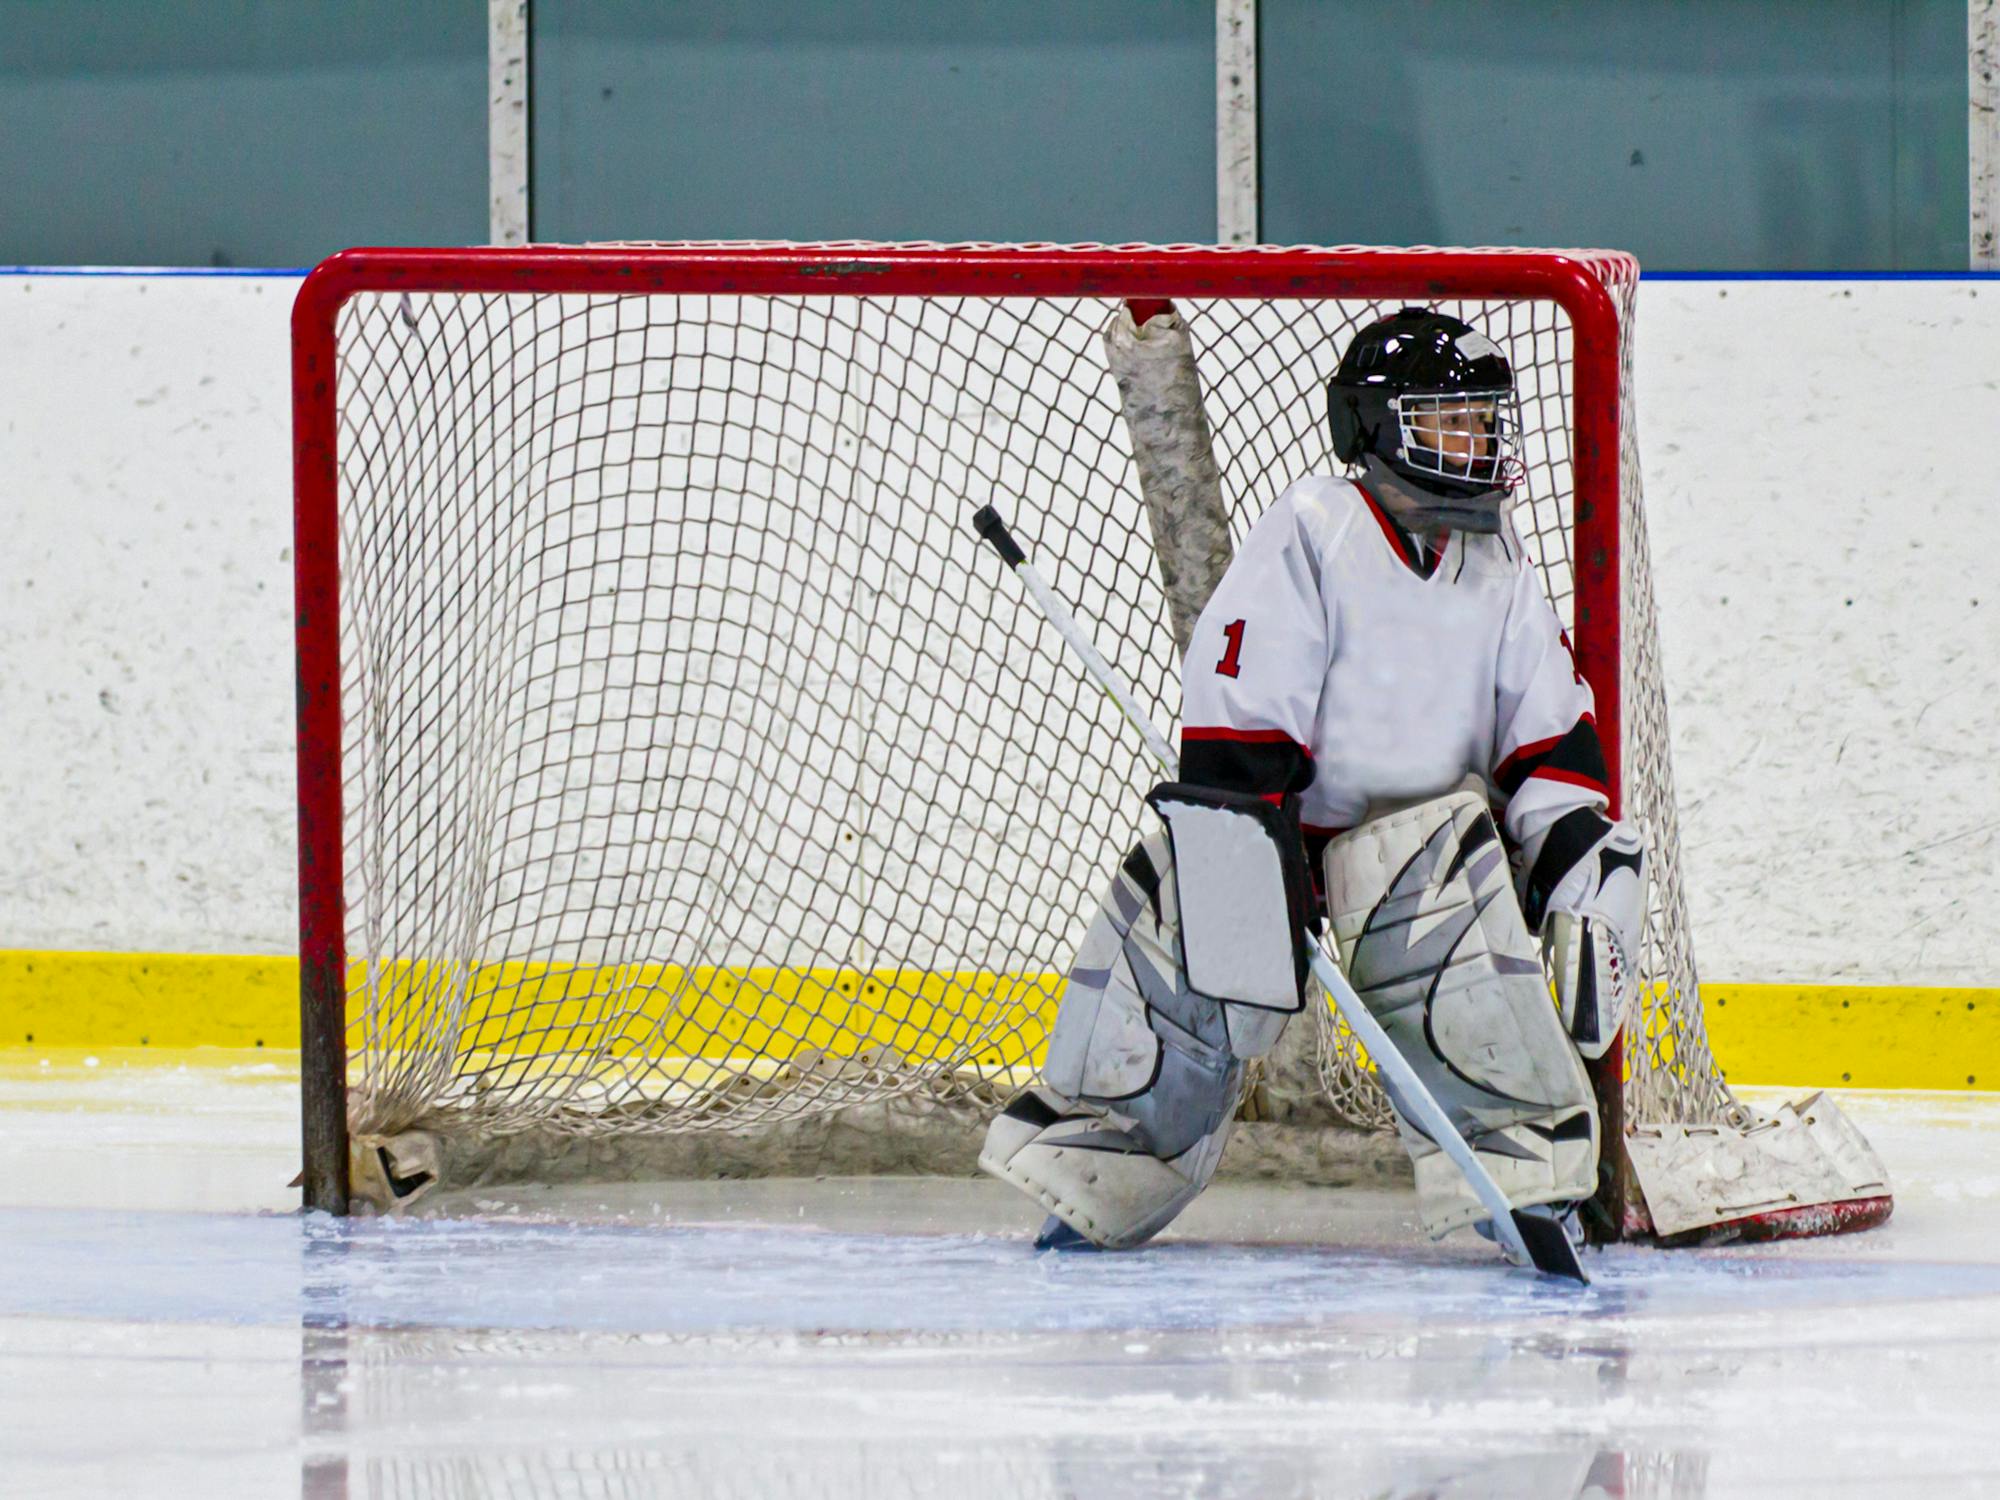 a young hockey goalie playing in net